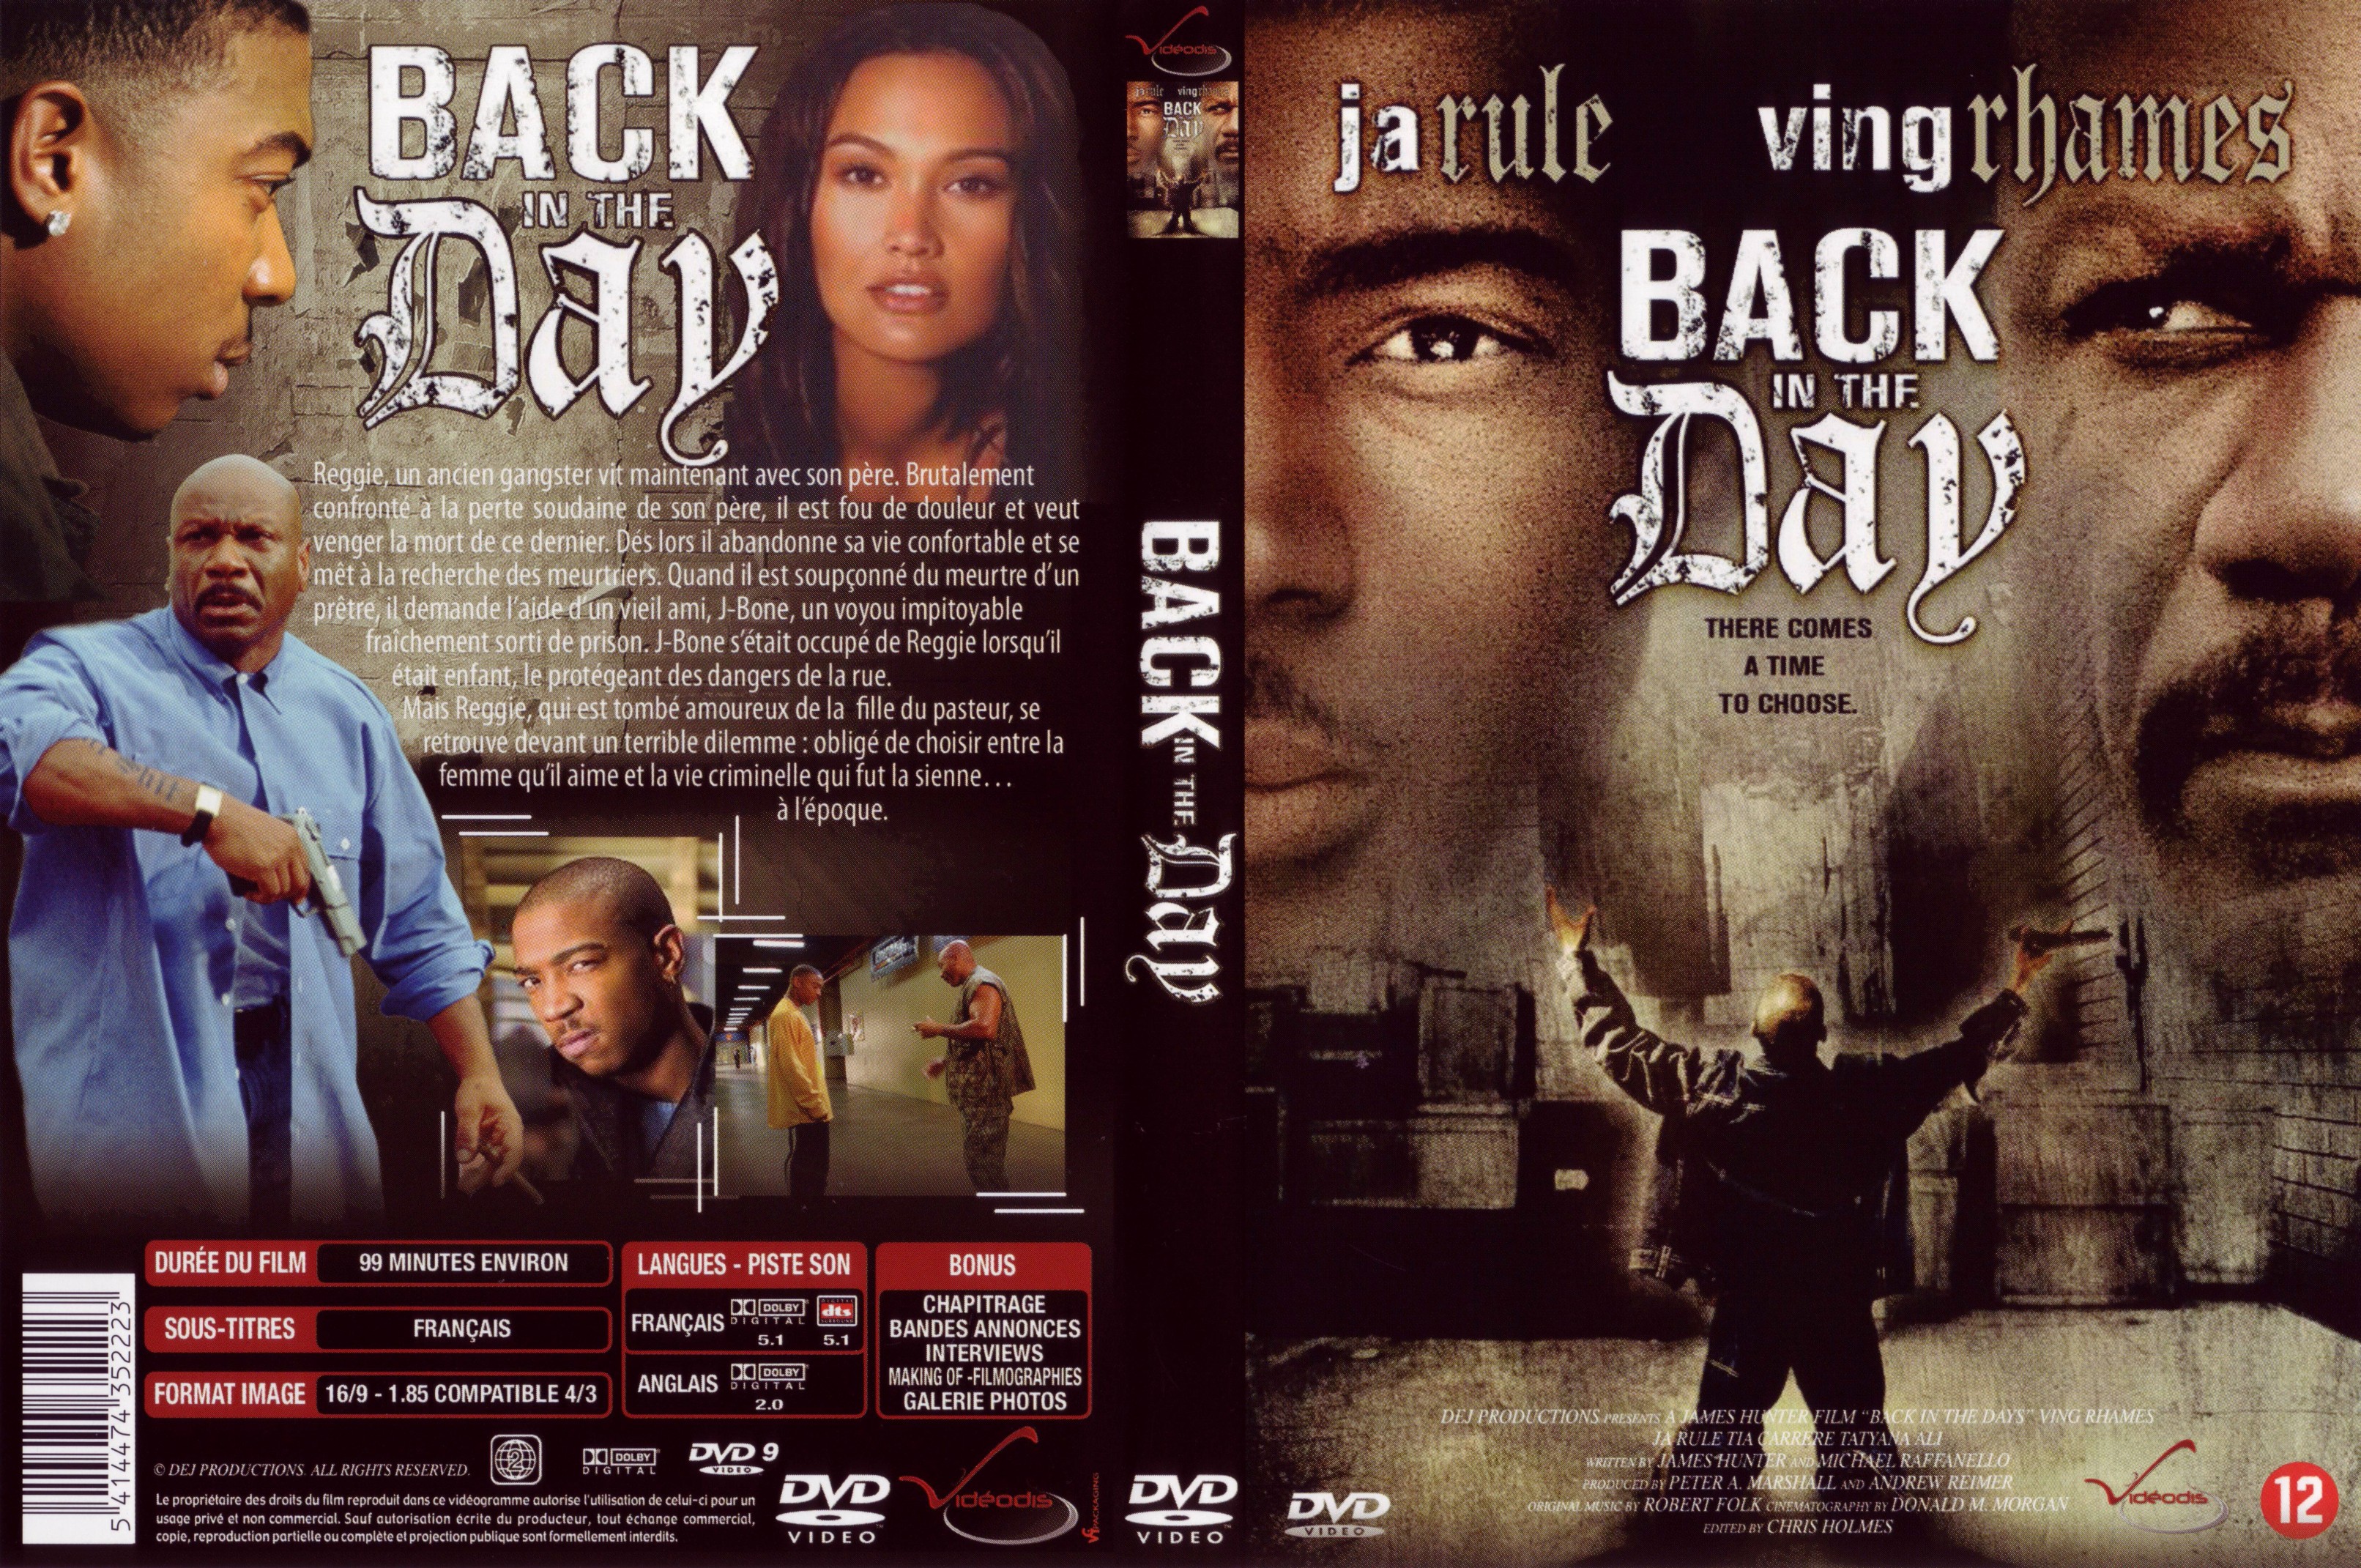 Jaquette DVD Back in the day v2